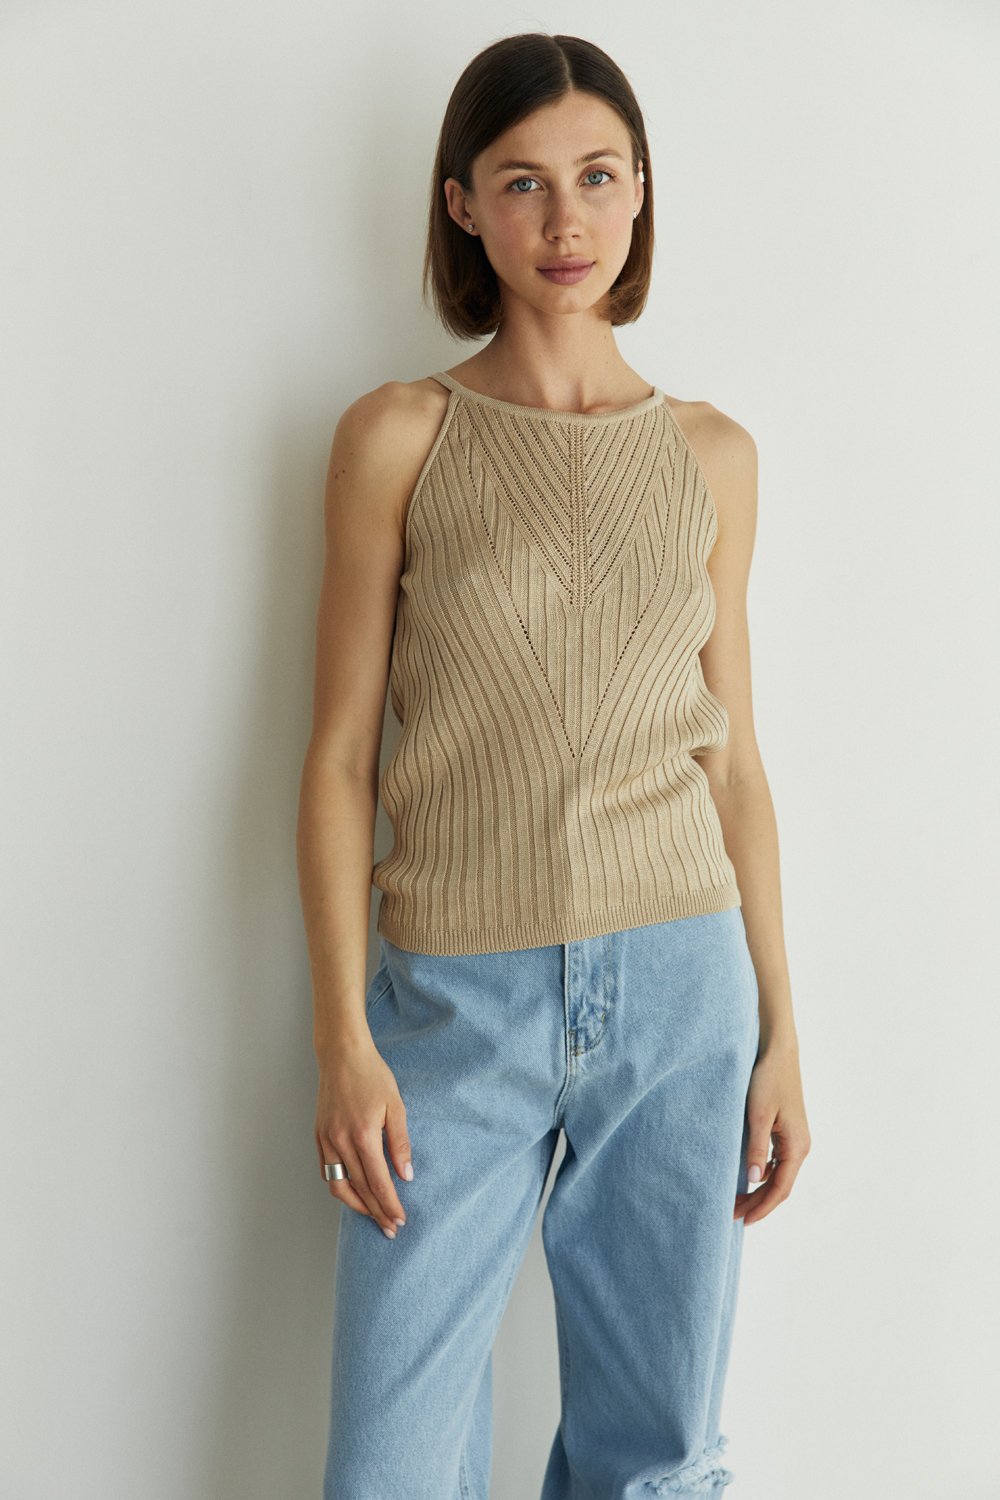 Beige knitted summer tank top with thin straps